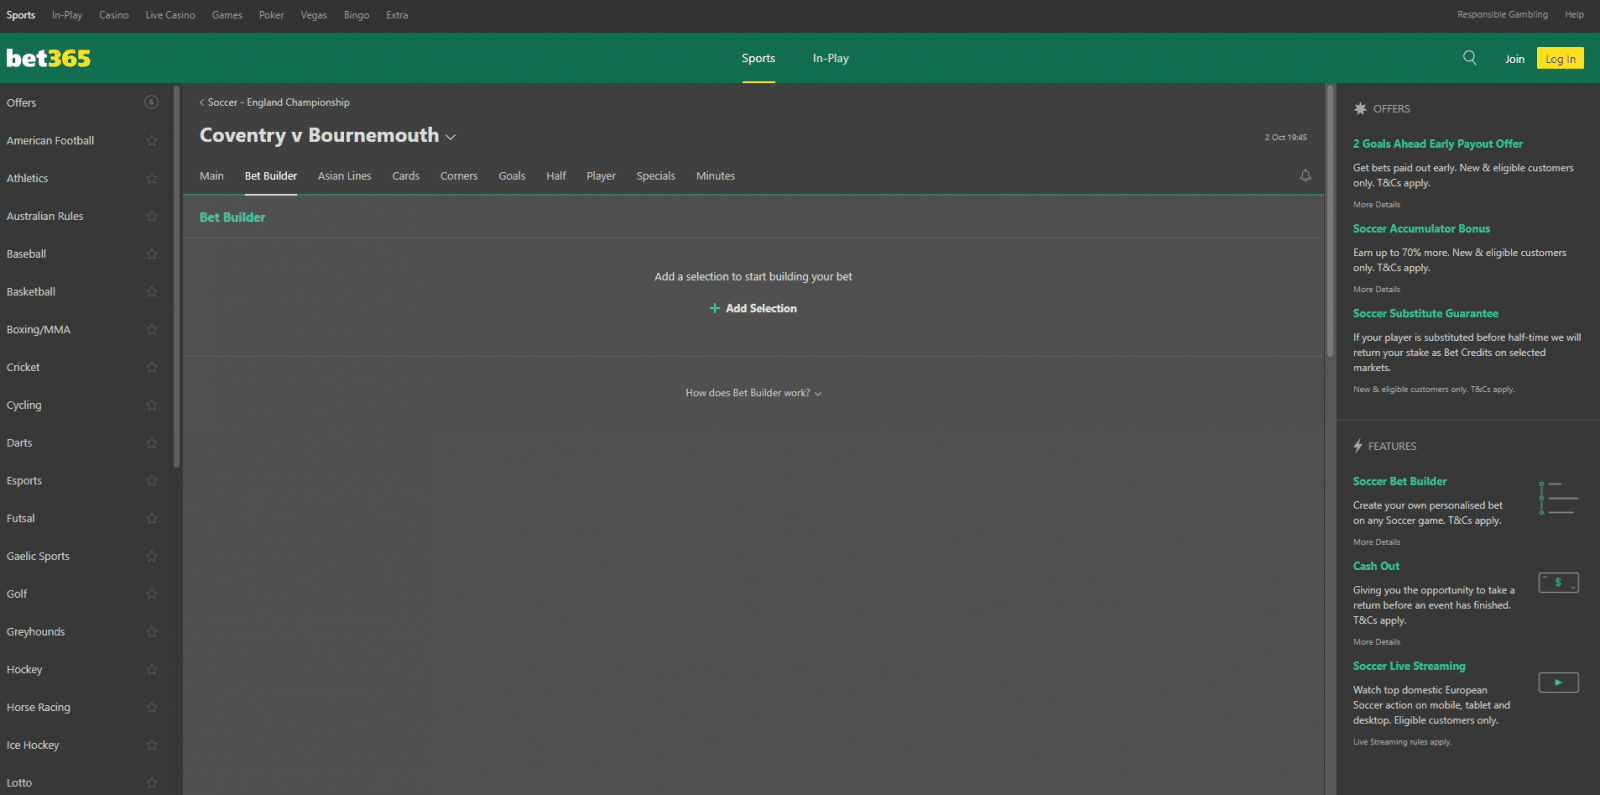 request a bet feature